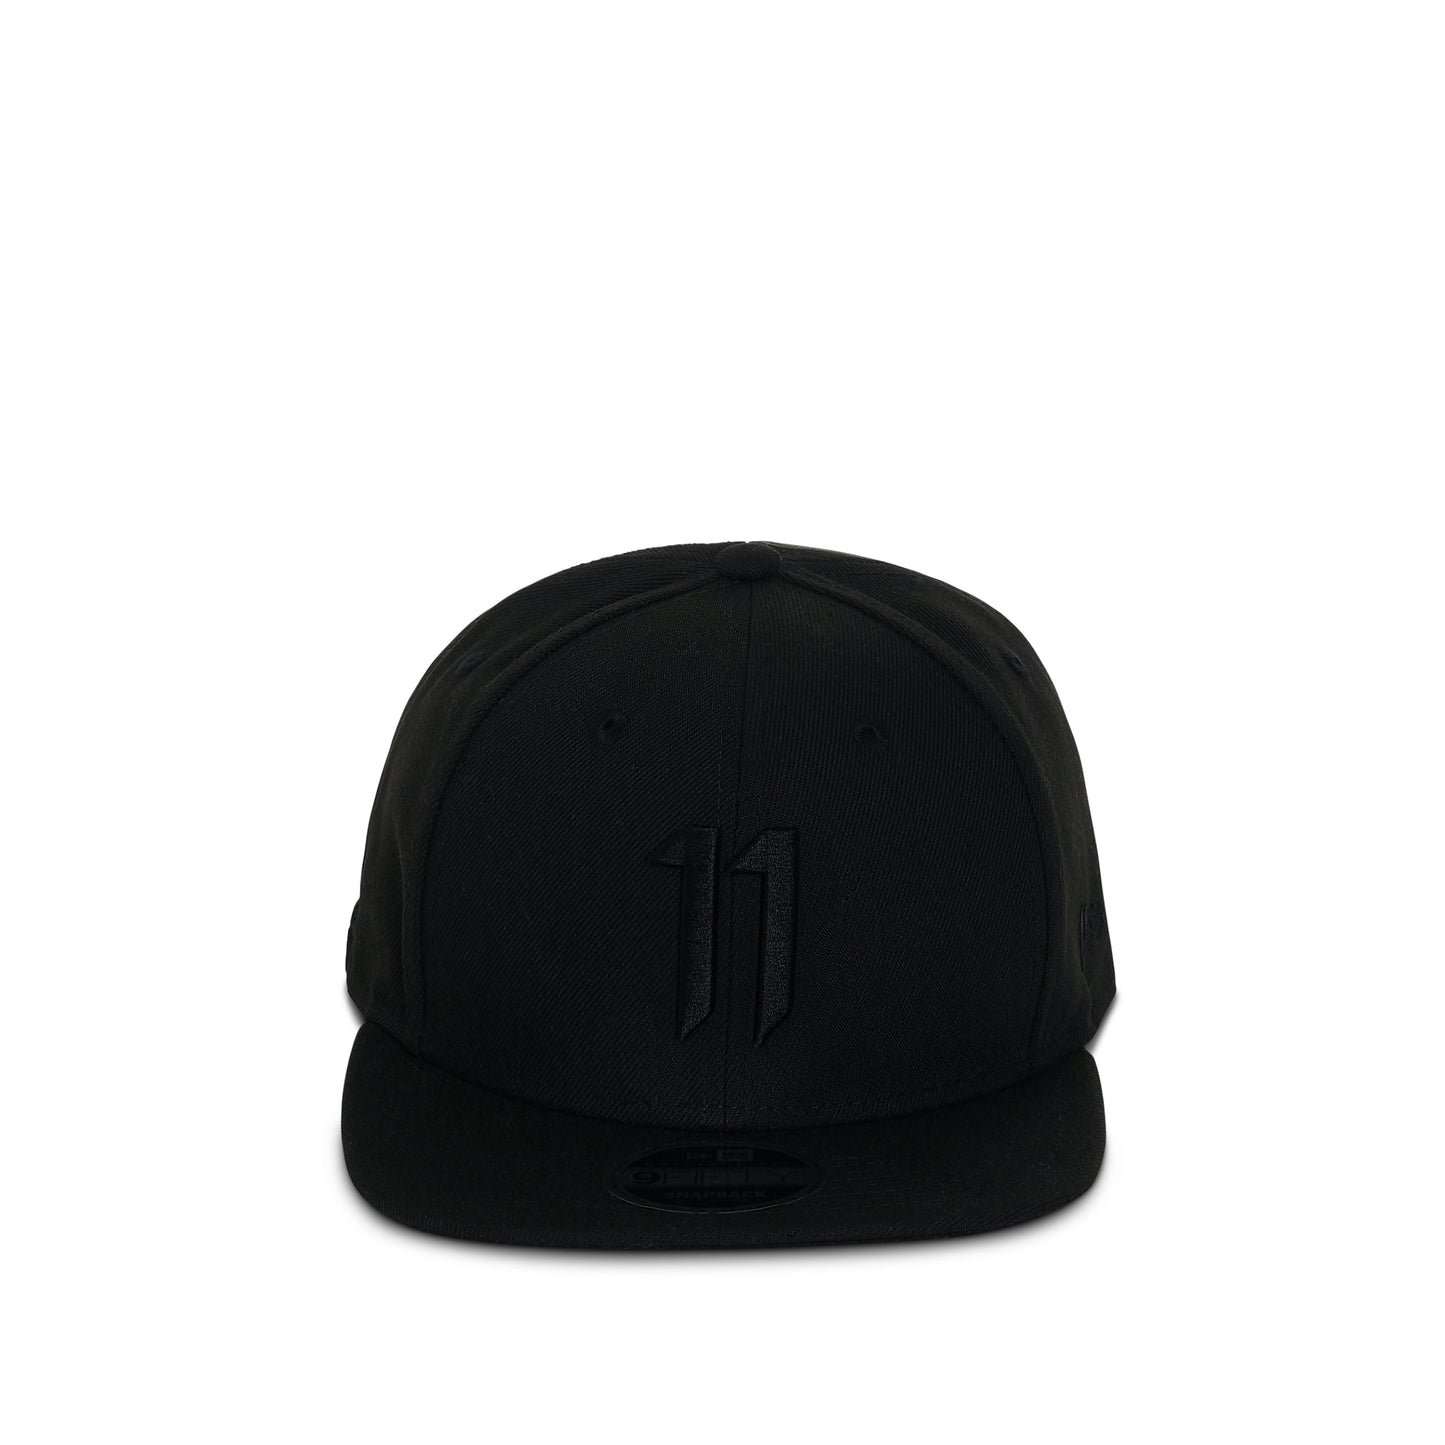 11 BBS Embroidered Cap